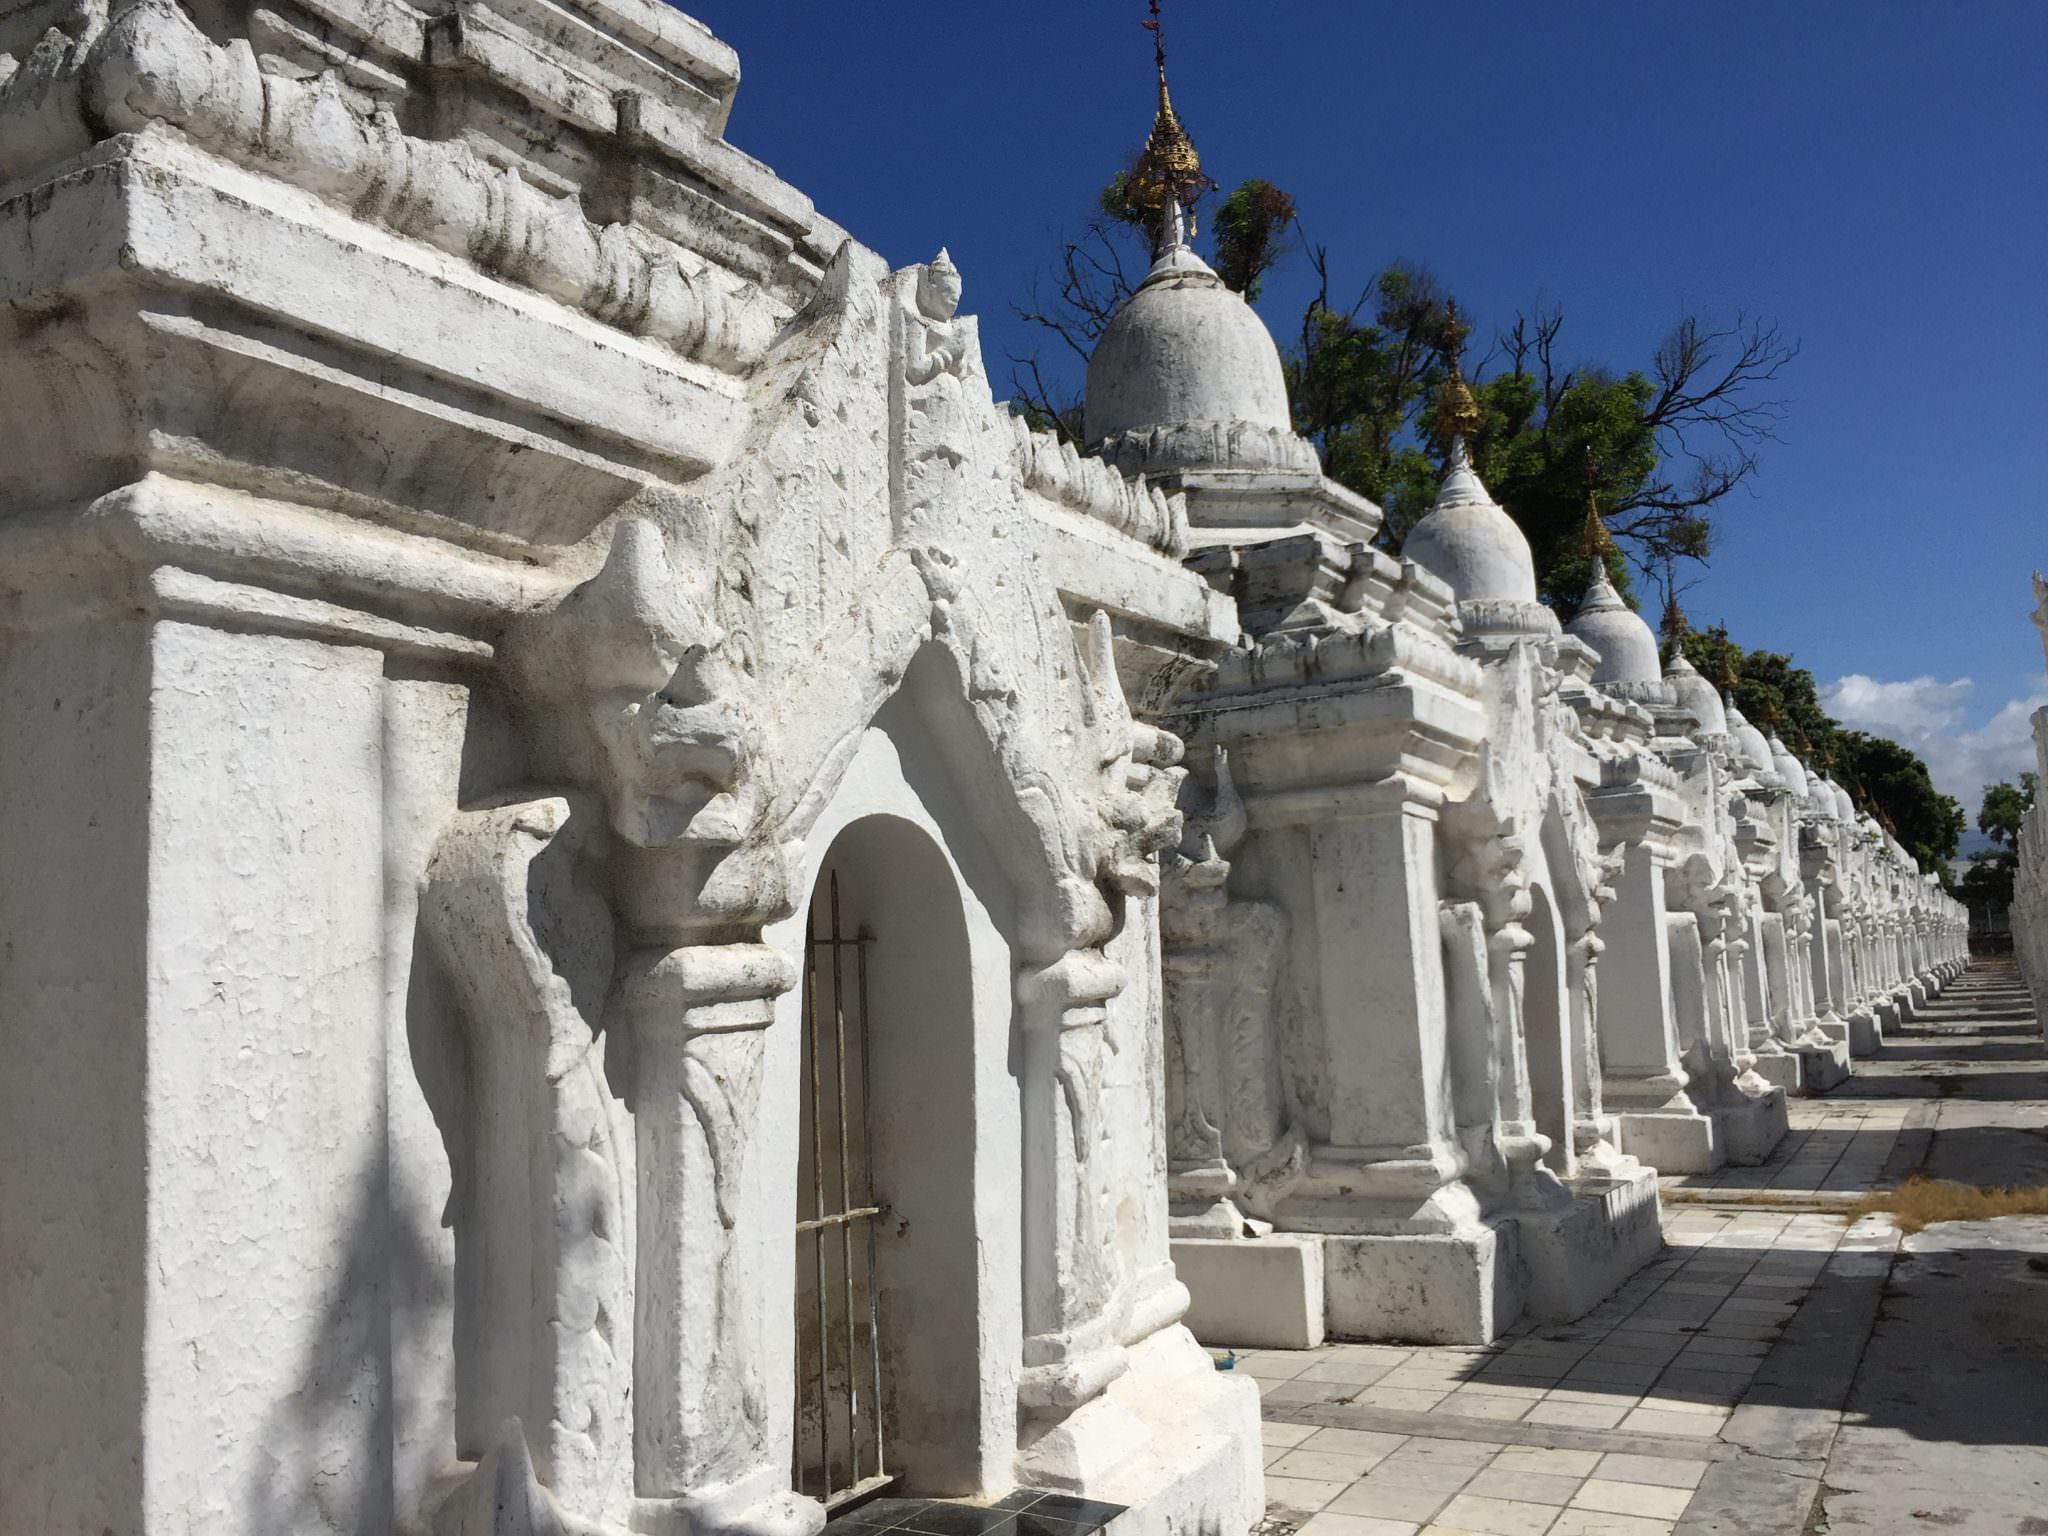 Row after row after row of stupas housing individual book pages at the Kuthodaw Pagoda complex. © 2015 Gail Jessen